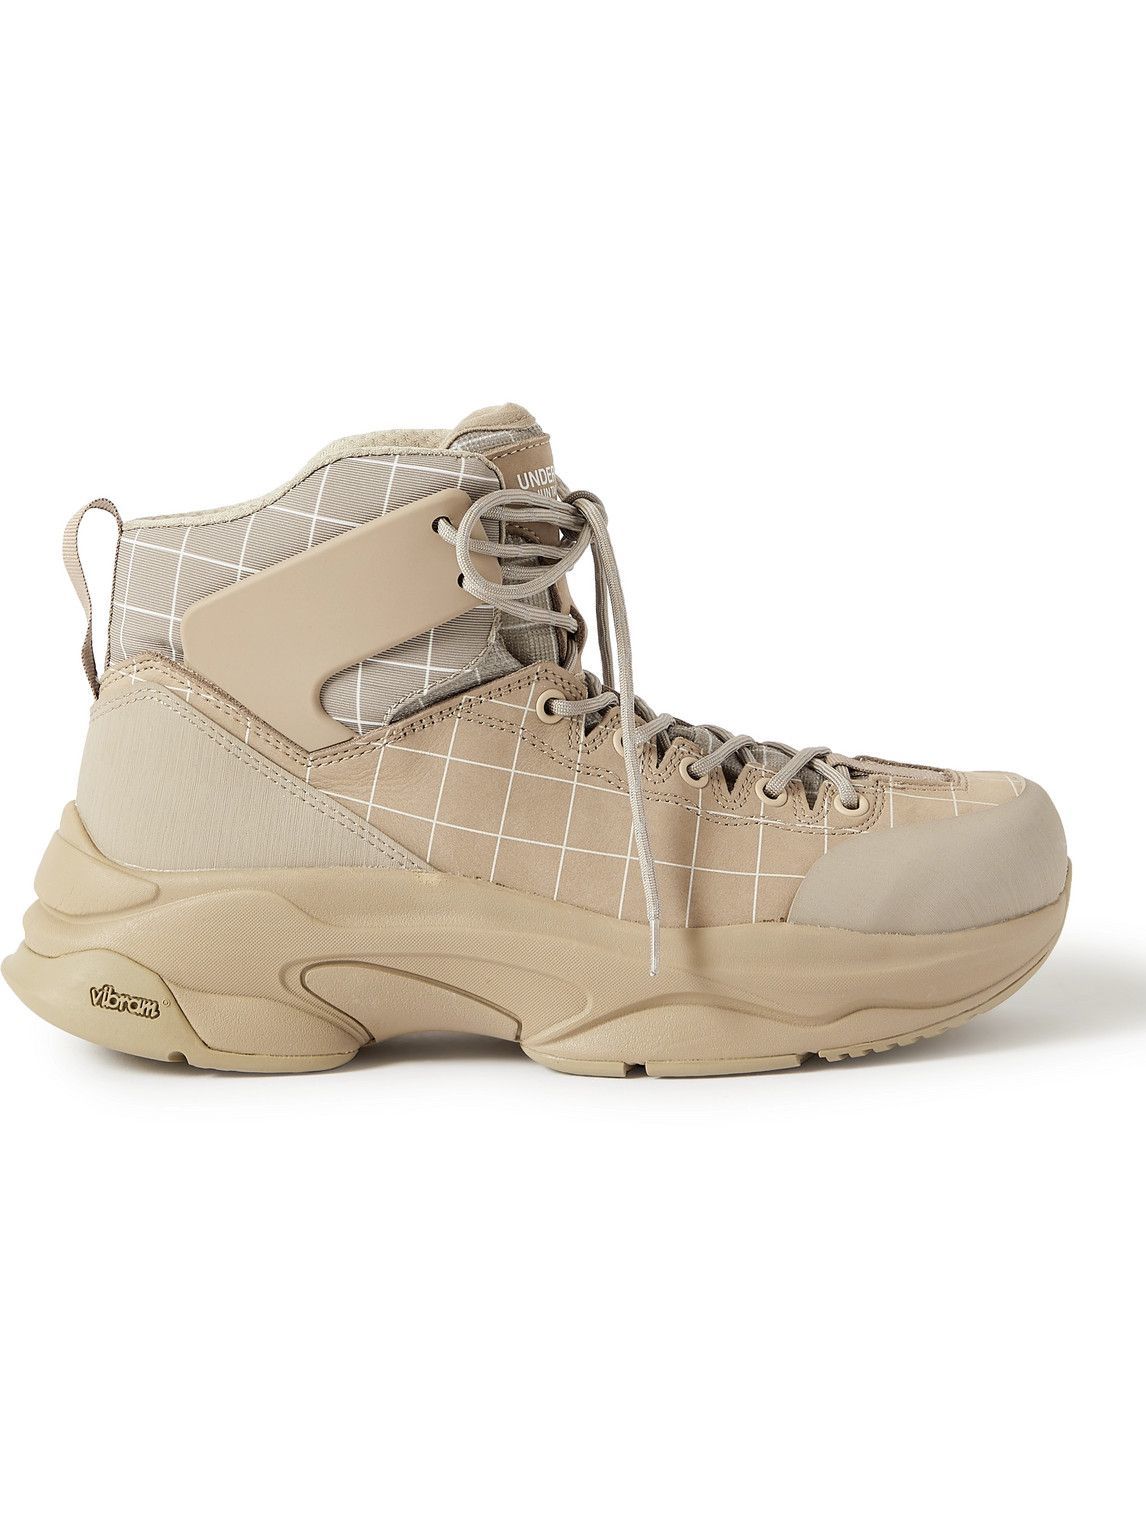 UNDERCOVER - Checked Nubuck and Canvas Hiking Boots - Neutrals Undercover